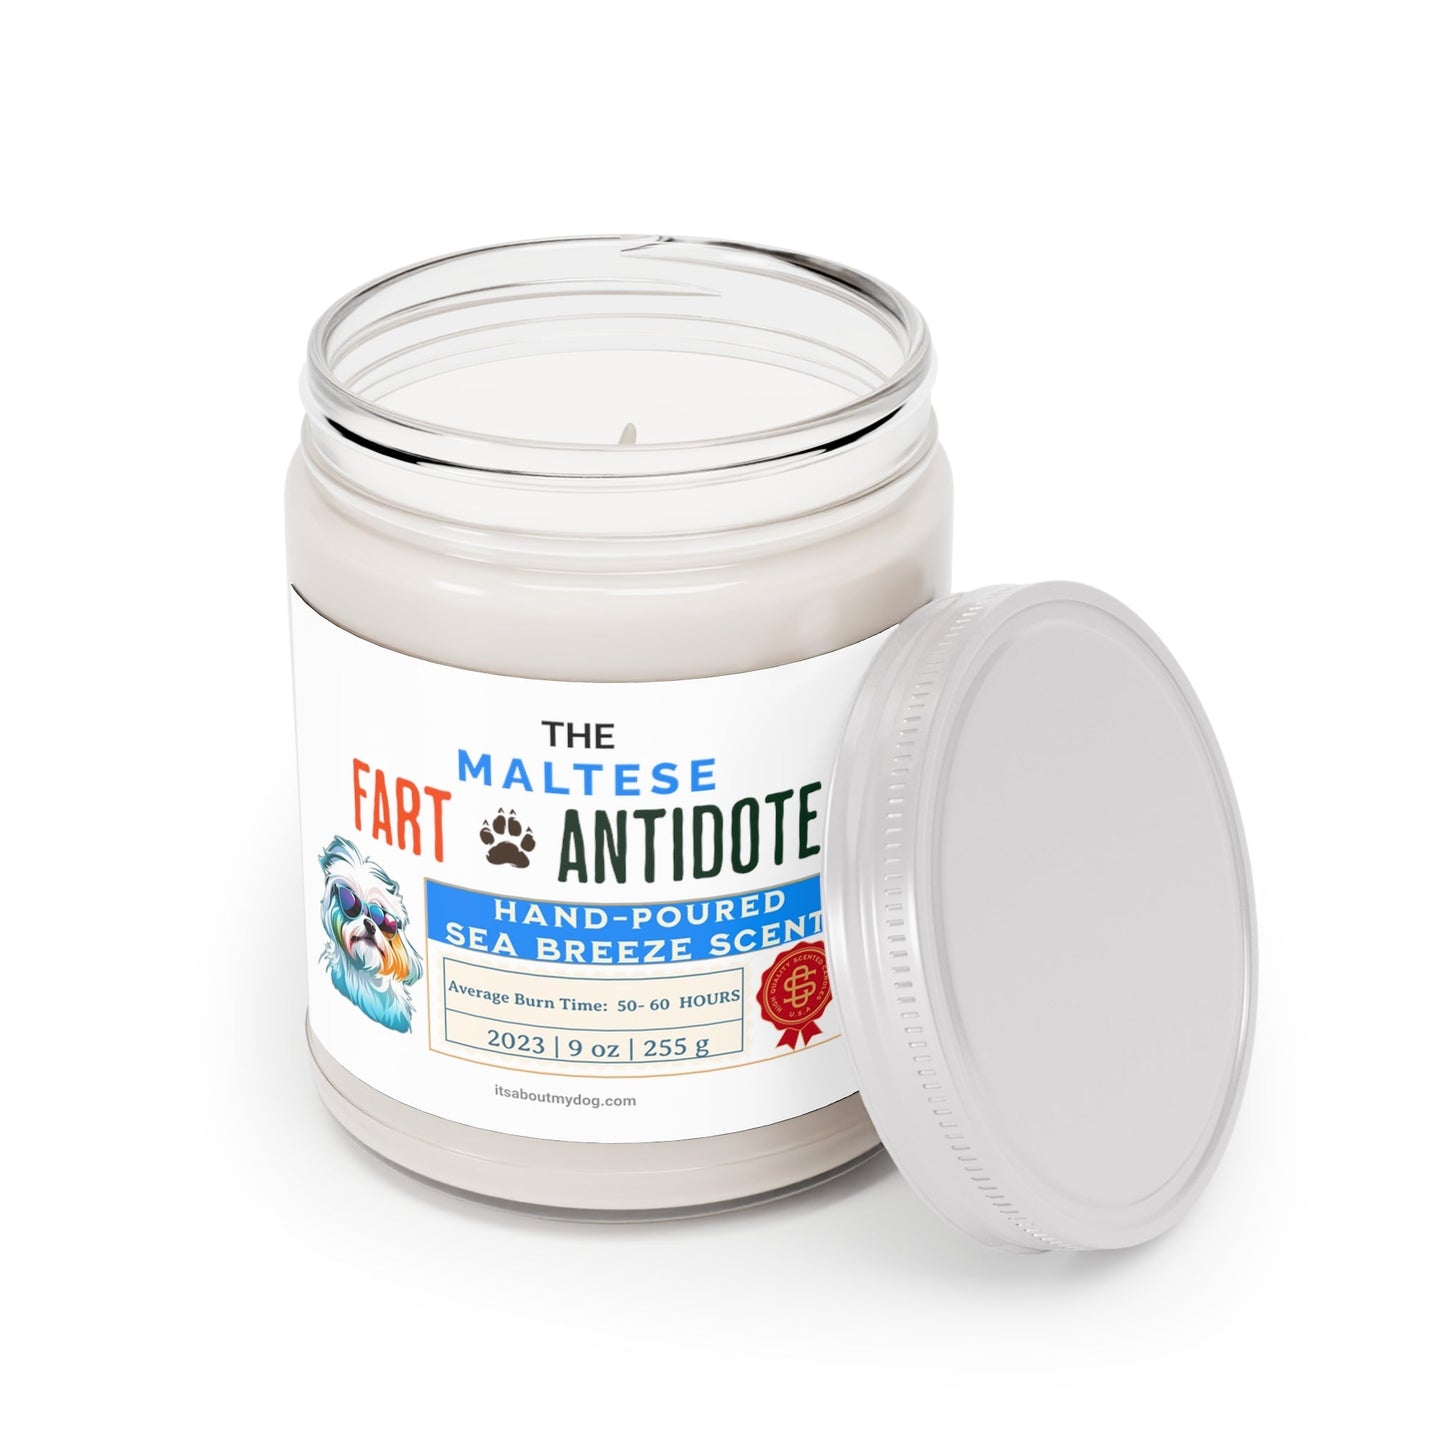 Maltese-Dog Fart Antidote-9Oz Scented Candle, Maltese Dog Gifts27.99-(FREE Delivery) Shop now at itsaboutmydog.com, Assembled in the USA, Maltese